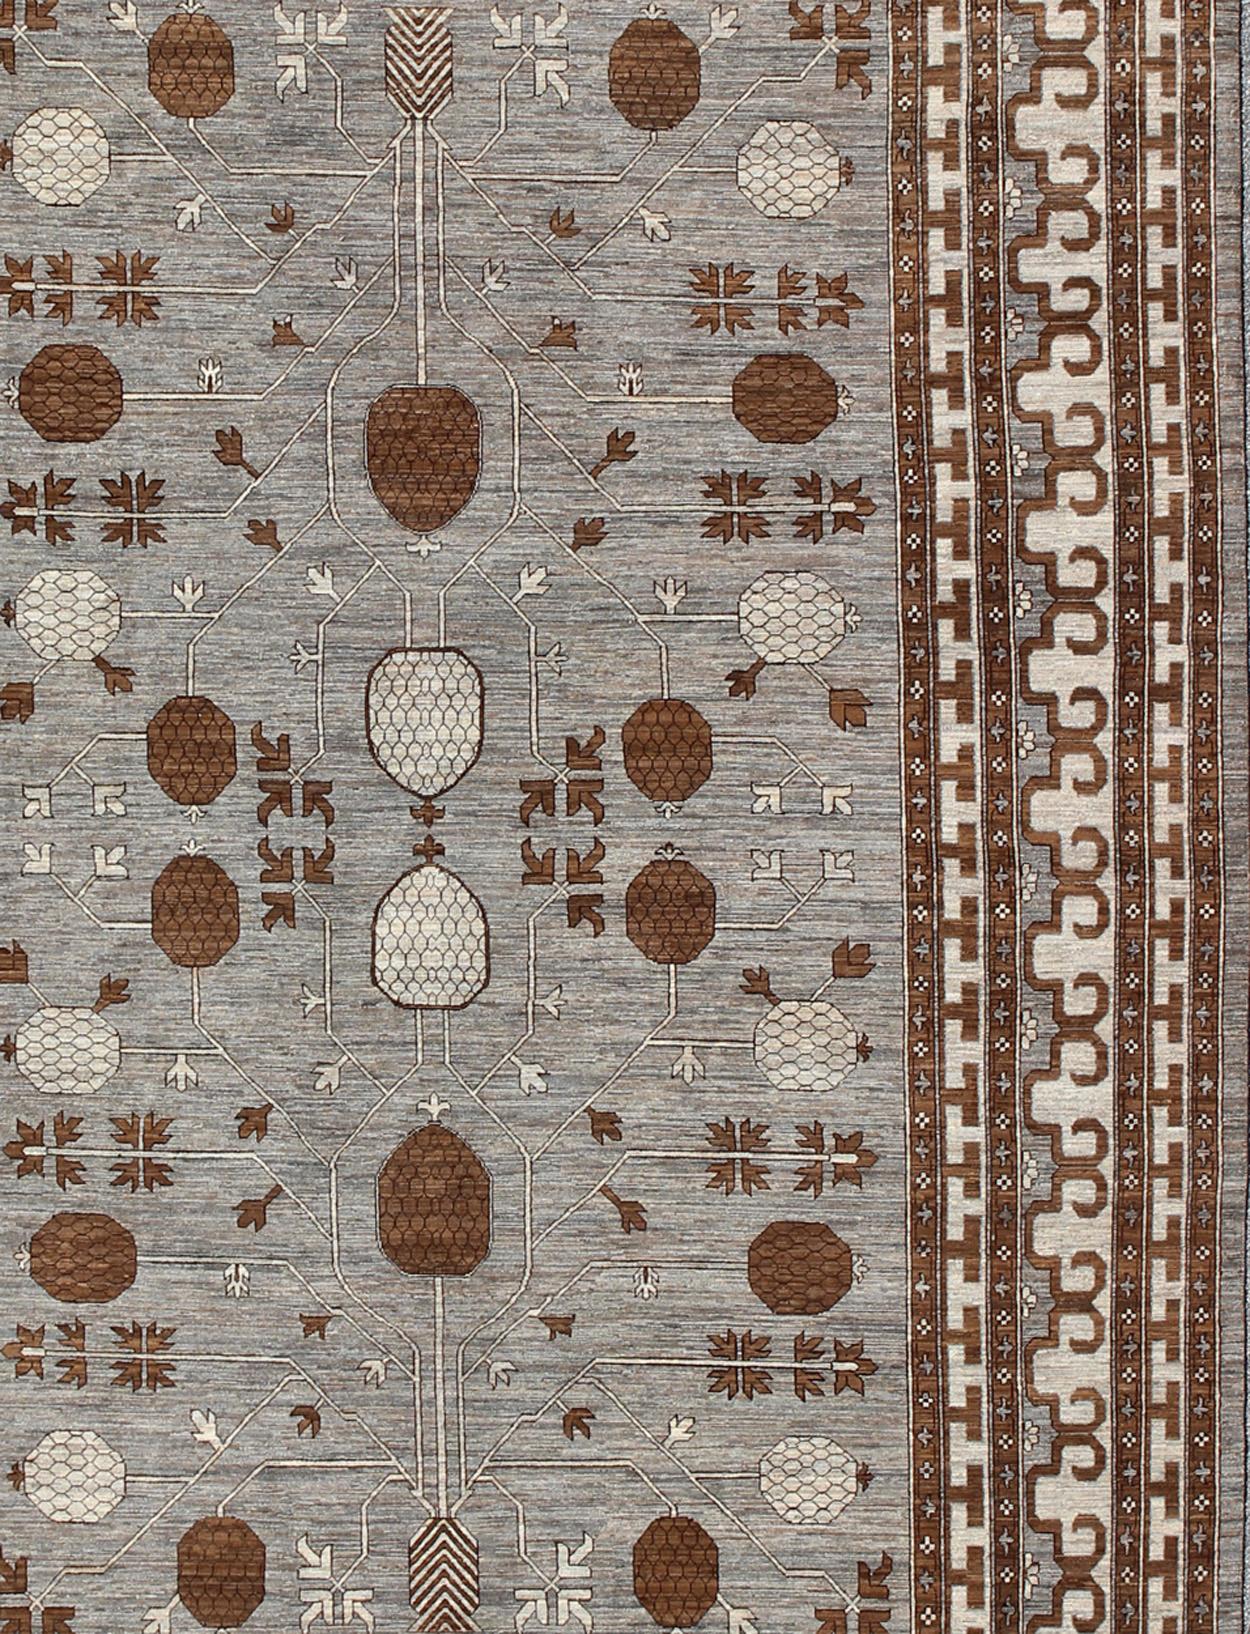 Large All-Over Design Khotan Rug in Gray Background by Keivan Woven Arts Large Khotan rug with all over Pomegranate Design. Keivan Woven Arts / rug MP-1709-1973, country of origin / type: Afghanistan / Khotan
Measures: 10'2 x 14'6.
This Khotan